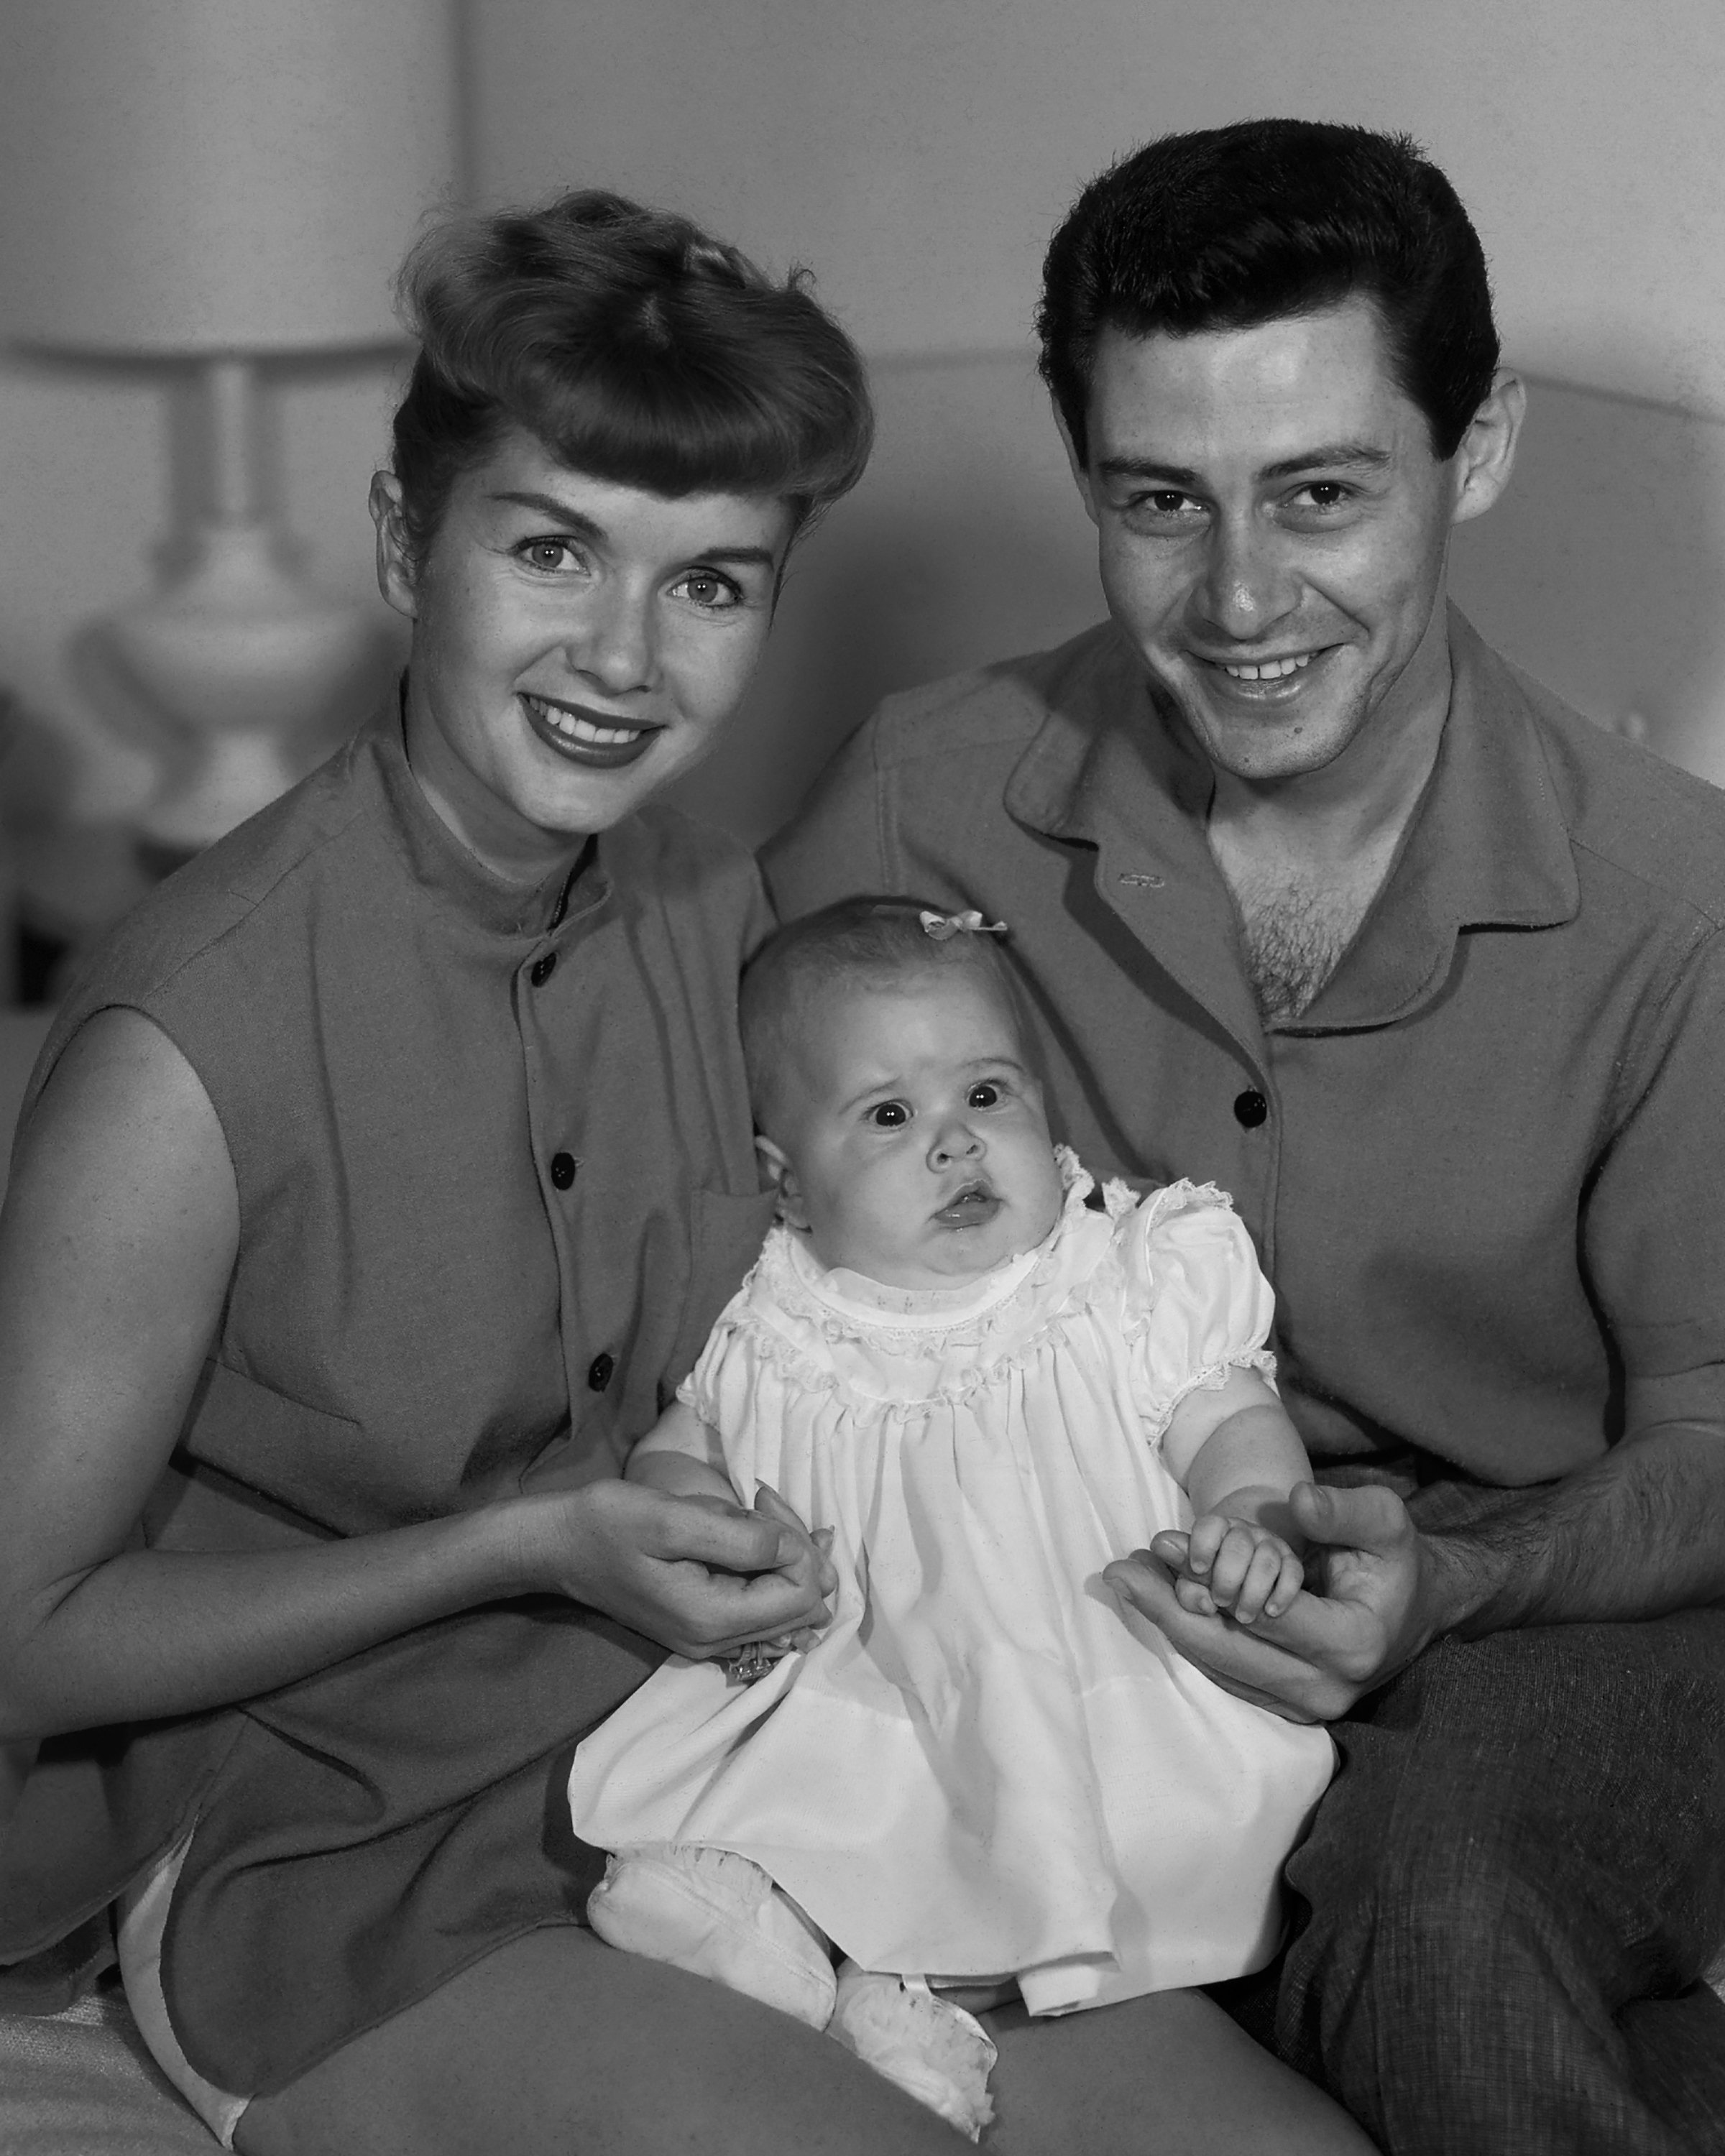 American actress and singer Debbie Reynolds (1932 - 2016) with her husband, singer Eddie Fisher (1928 - 2010) and their baby daughter Carrie Fisher (1956 - 2016), circa 1956 | Source: Getty Images 